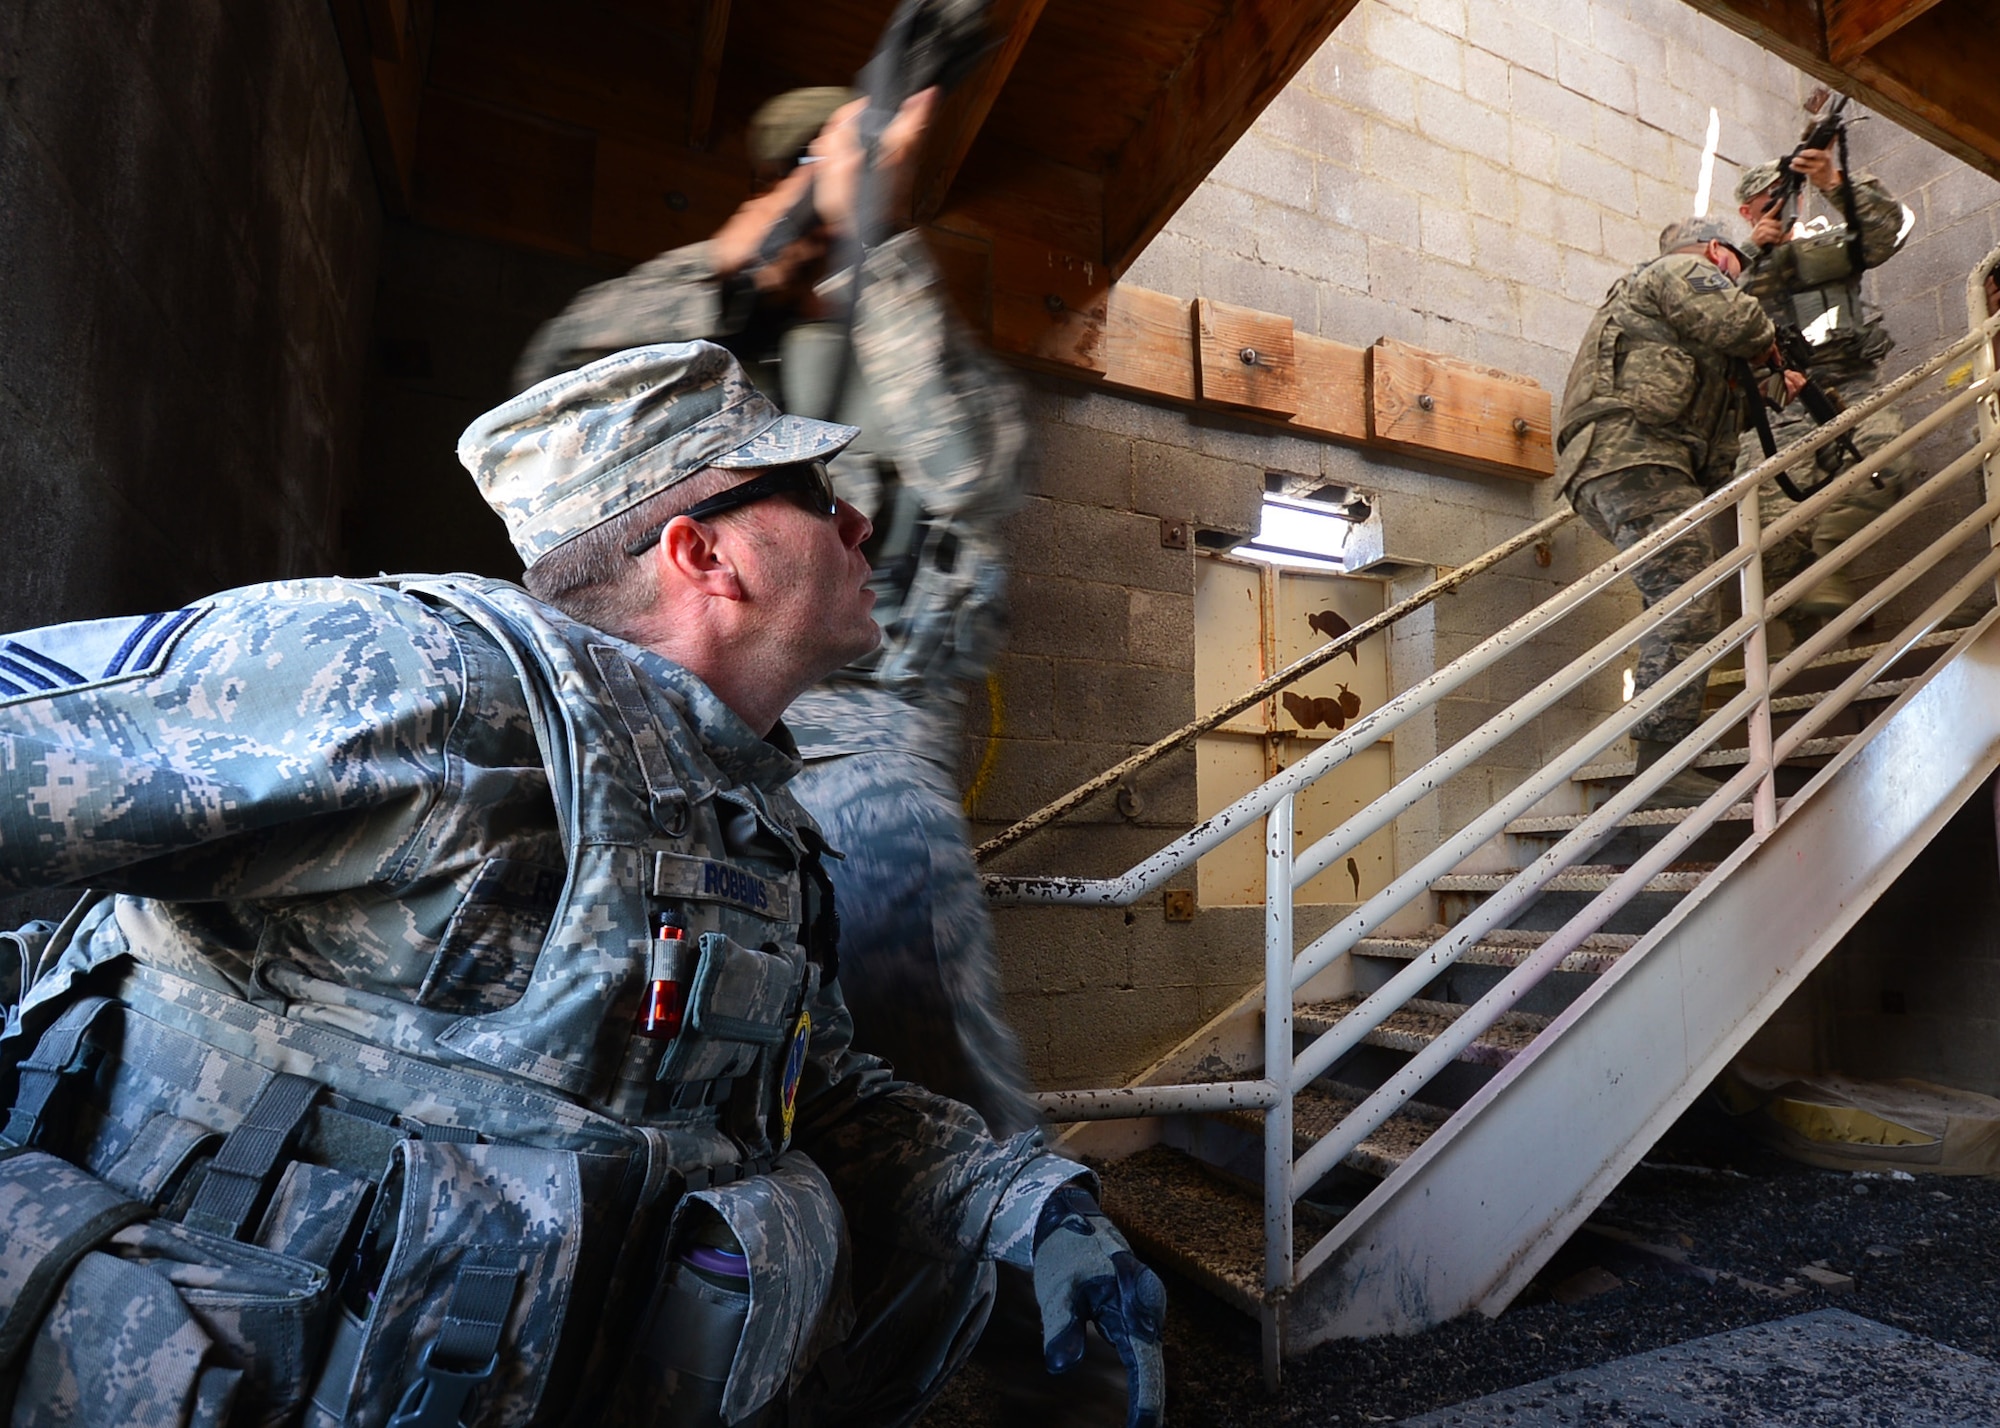 Senior Master Sgt. James Robbins observes his fire team during a stairwell clearing exercise March 5, 2014, at Silver Flag Alpha, 99th Ground Combat Training Squadron Range, Nev. Robbins is a 99th GCTS instructor and superintendent of operations. (U.S. Air Force photo by Staff Sgt. N.B/Released)